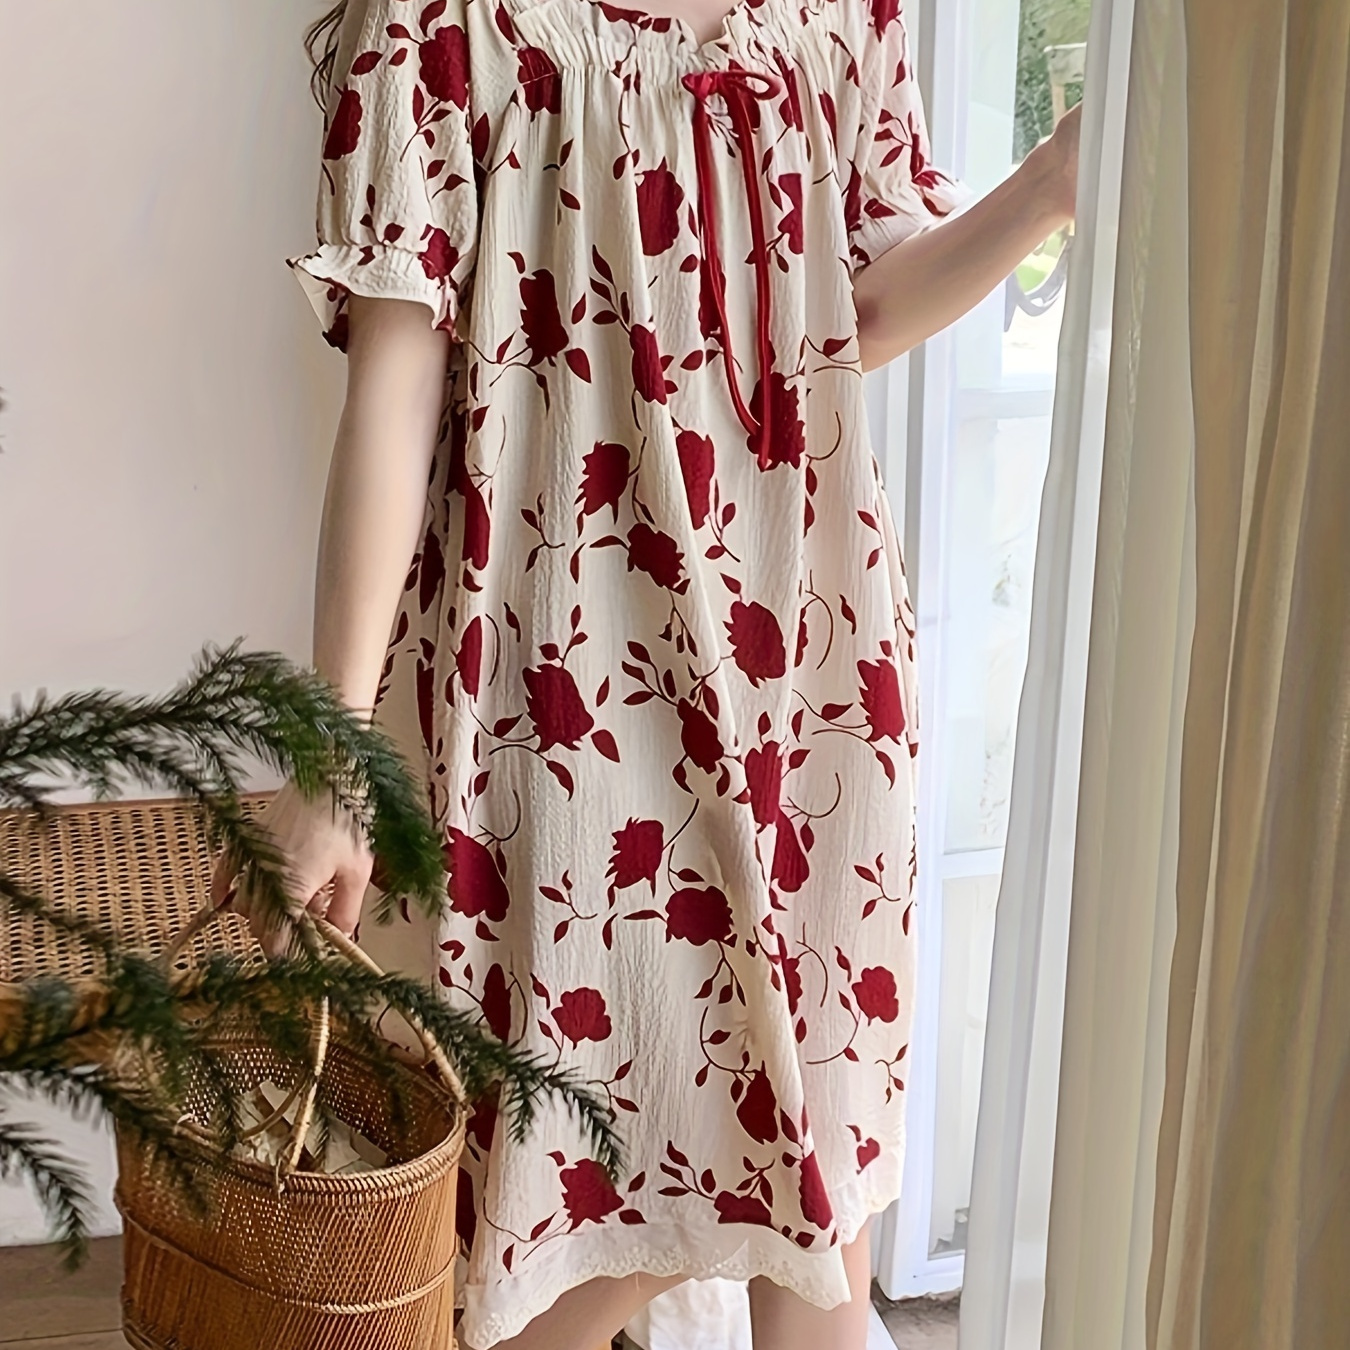 

Women's Rose Print Sweet Textured Sleepwear Dress, Puff Sleeve Bow Knot Detail Square Neck Loose Fit Lace Trim Dress, Comfortable Nightgown